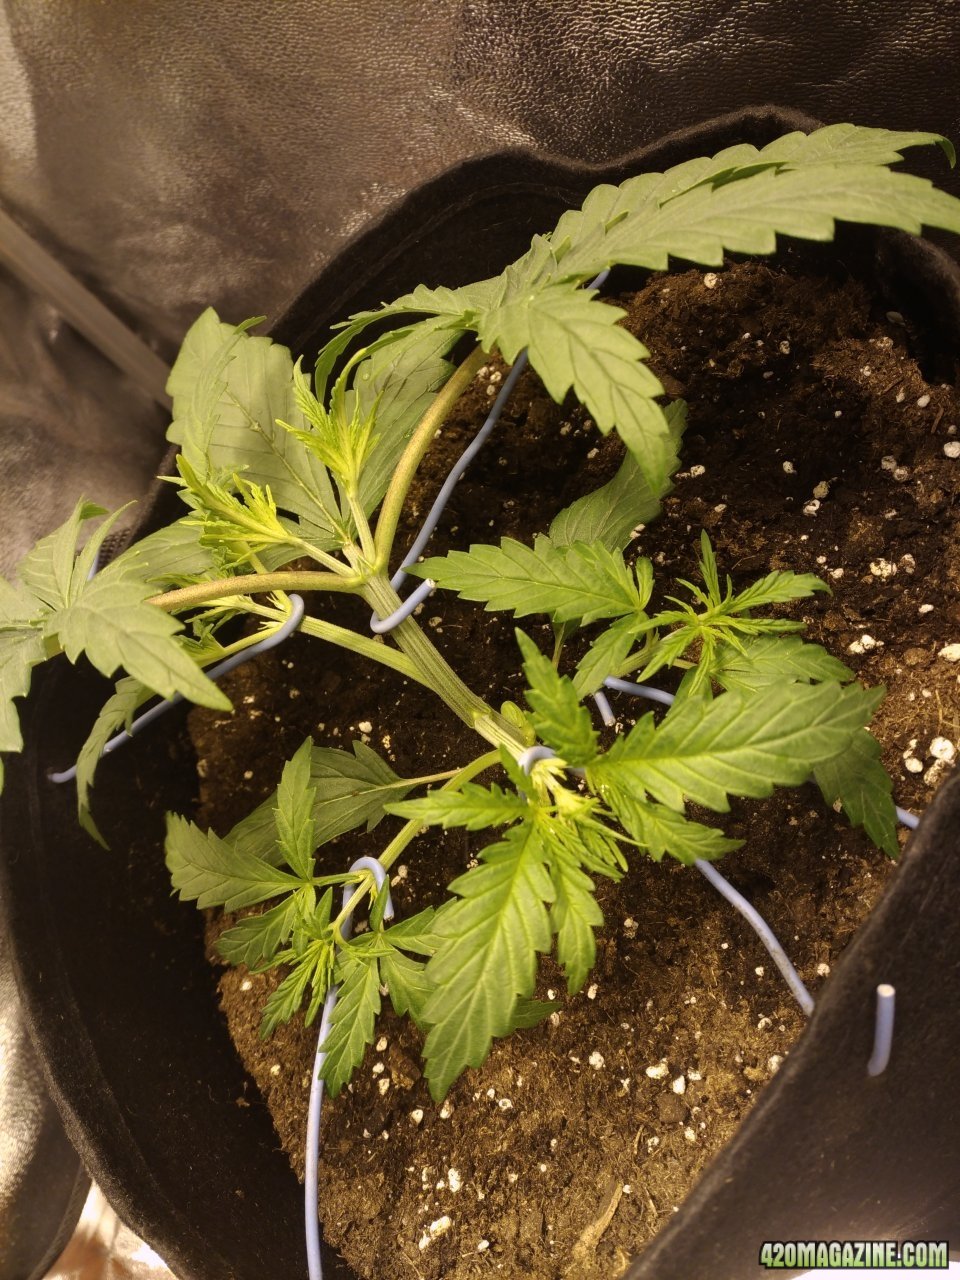 day 20 - sexbud first time trying LST